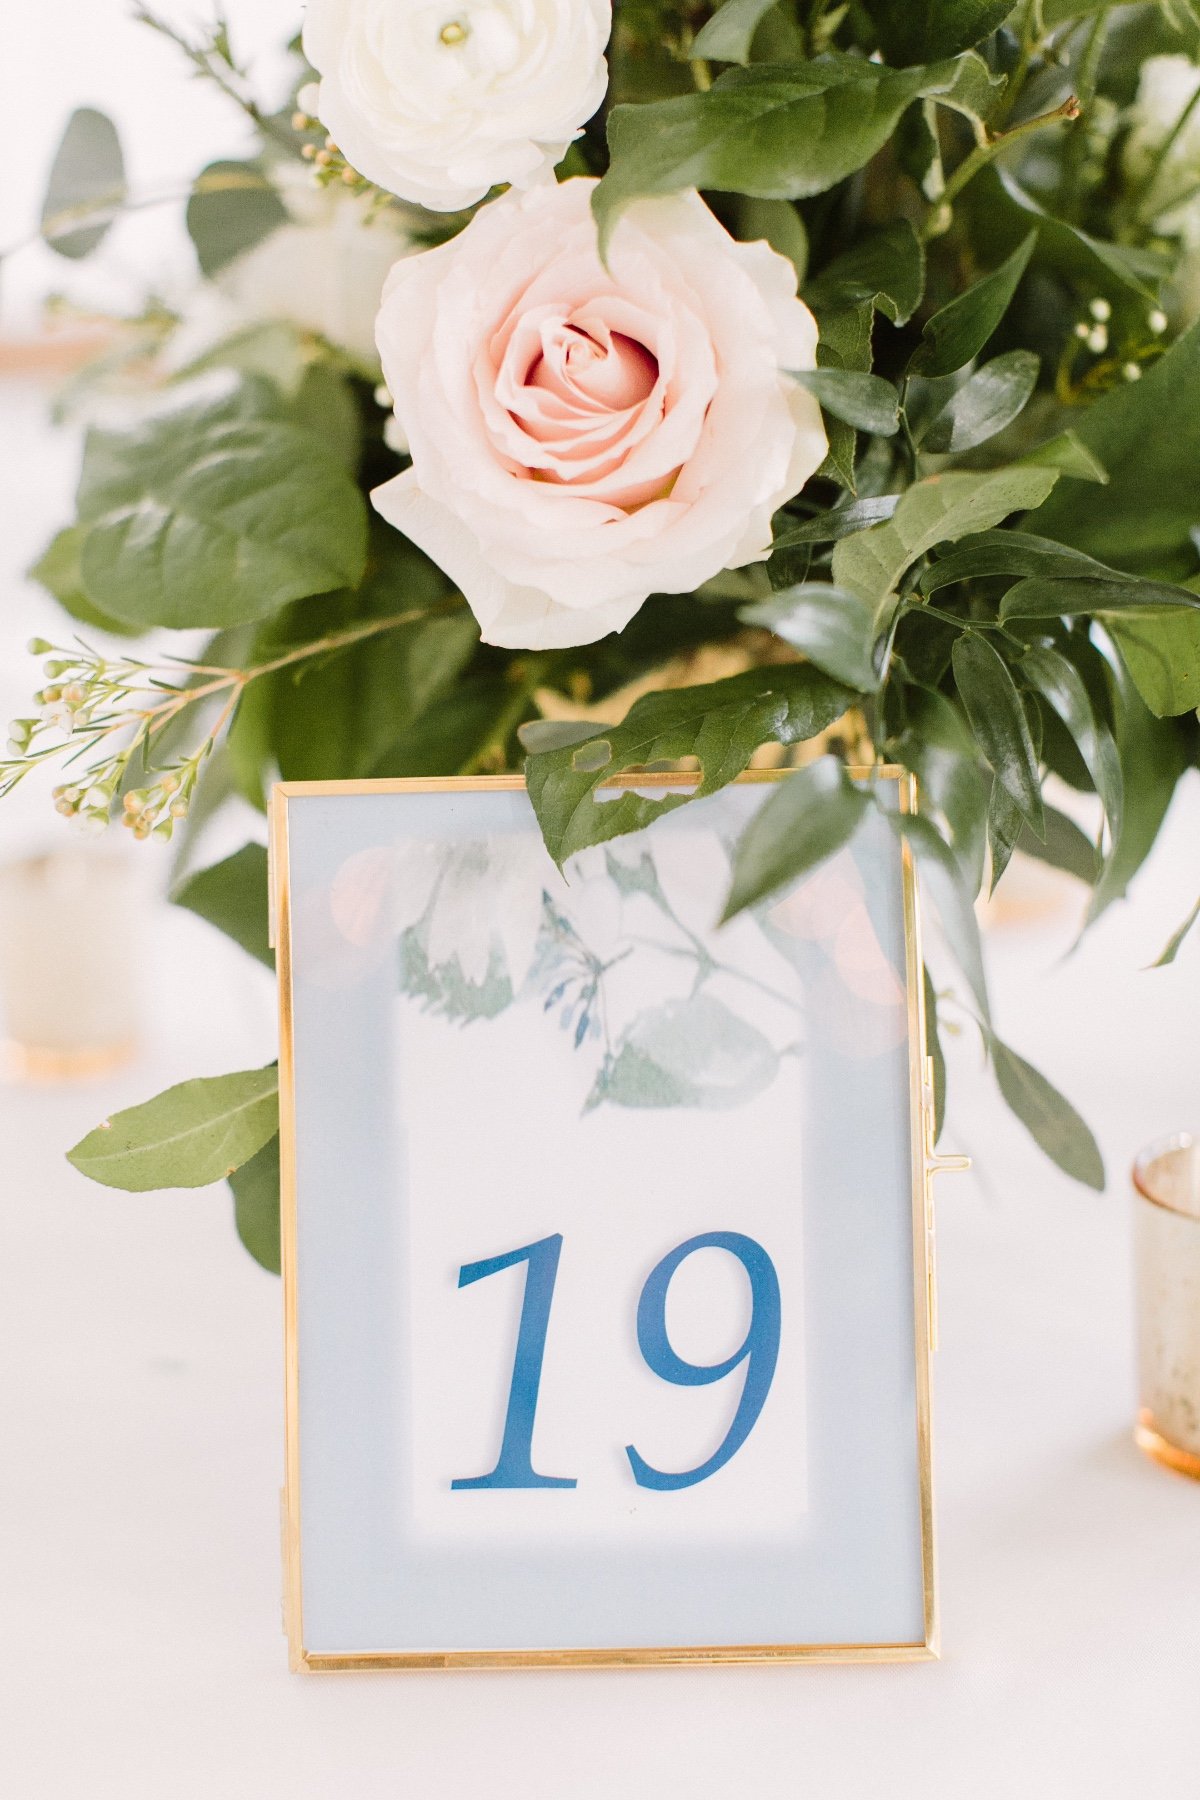 gold framed table numbers